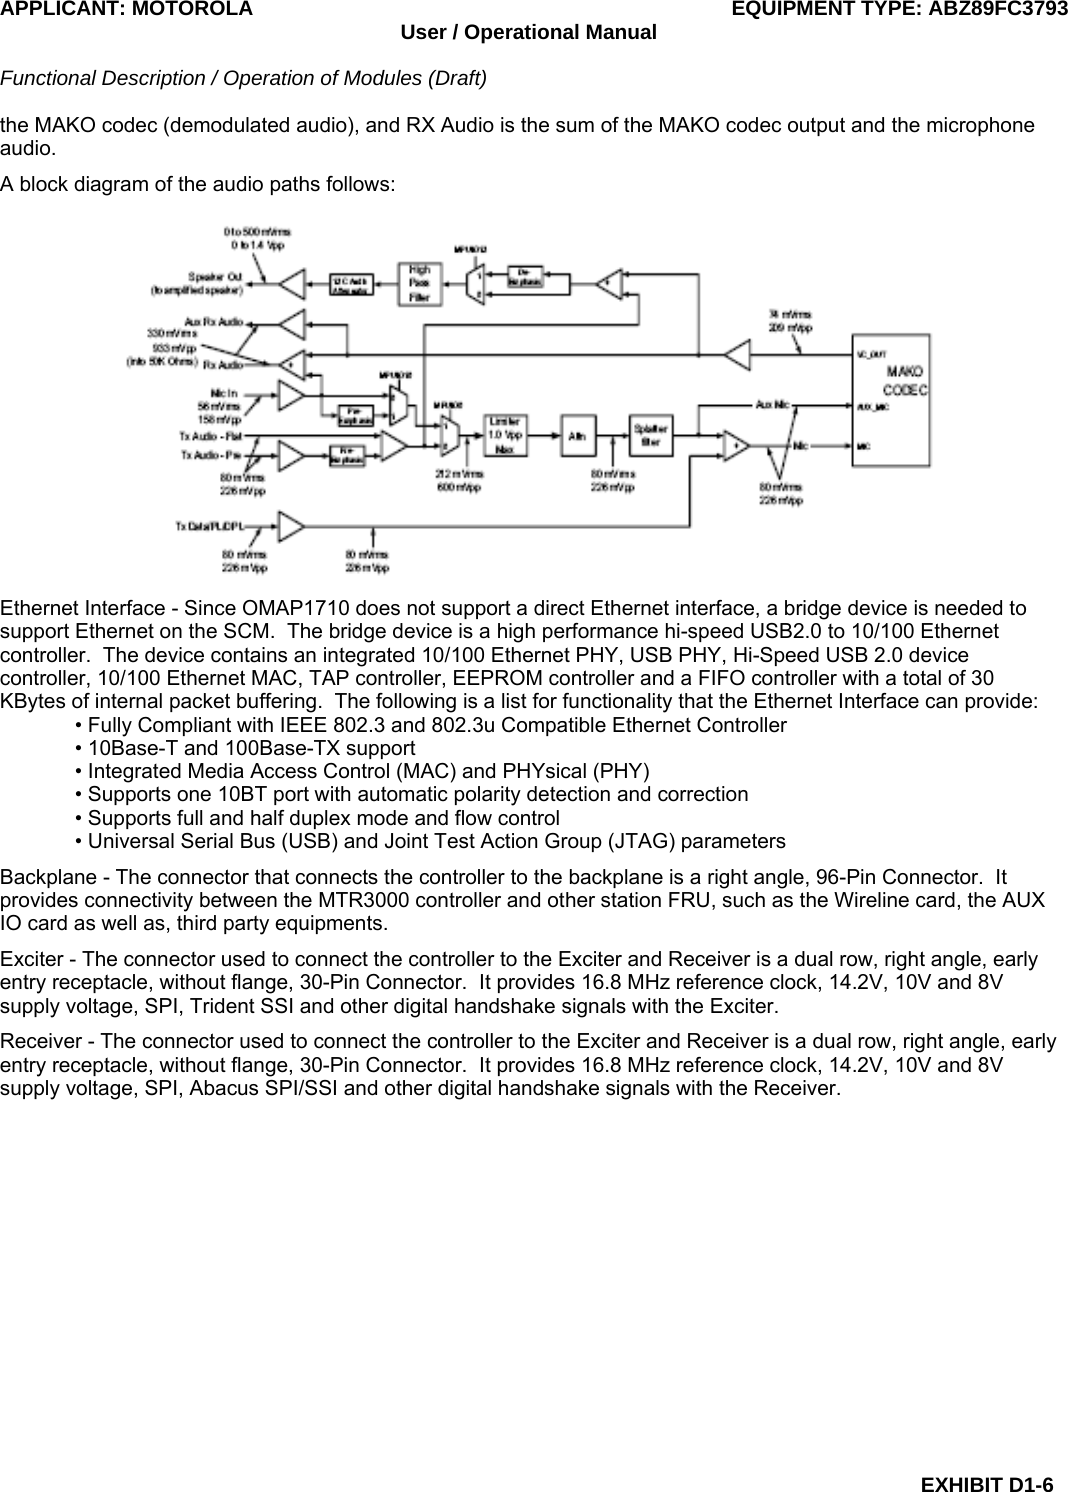 APPLICANT: MOTOROLA  EQUIPMENT TYPE: ABZ89FC3793 User / Operational Manual  Functional Description / Operation of Modules (Draft)  EXHIBIT D1-6 the MAKO codec (demodulated audio), and RX Audio is the sum of the MAKO codec output and the microphone audio. A block diagram of the audio paths follows:  Ethernet Interface - Since OMAP1710 does not support a direct Ethernet interface, a bridge device is needed to support Ethernet on the SCM.  The bridge device is a high performance hi-speed USB2.0 to 10/100 Ethernet controller.  The device contains an integrated 10/100 Ethernet PHY, USB PHY, Hi-Speed USB 2.0 device controller, 10/100 Ethernet MAC, TAP controller, EEPROM controller and a FIFO controller with a total of 30 KBytes of internal packet buffering.  The following is a list for functionality that the Ethernet Interface can provide: • Fully Compliant with IEEE 802.3 and 802.3u Compatible Ethernet Controller • 10Base-T and 100Base-TX support • Integrated Media Access Control (MAC) and PHYsical (PHY) • Supports one 10BT port with automatic polarity detection and correction • Supports full and half duplex mode and flow control • Universal Serial Bus (USB) and Joint Test Action Group (JTAG) parameters Backplane - The connector that connects the controller to the backplane is a right angle, 96-Pin Connector.  It provides connectivity between the MTR3000 controller and other station FRU, such as the Wireline card, the AUX IO card as well as, third party equipments. Exciter - The connector used to connect the controller to the Exciter and Receiver is a dual row, right angle, early entry receptacle, without flange, 30-Pin Connector.  It provides 16.8 MHz reference clock, 14.2V, 10V and 8V supply voltage, SPI, Trident SSI and other digital handshake signals with the Exciter. Receiver - The connector used to connect the controller to the Exciter and Receiver is a dual row, right angle, early entry receptacle, without flange, 30-Pin Connector.  It provides 16.8 MHz reference clock, 14.2V, 10V and 8V supply voltage, SPI, Abacus SPI/SSI and other digital handshake signals with the Receiver.  